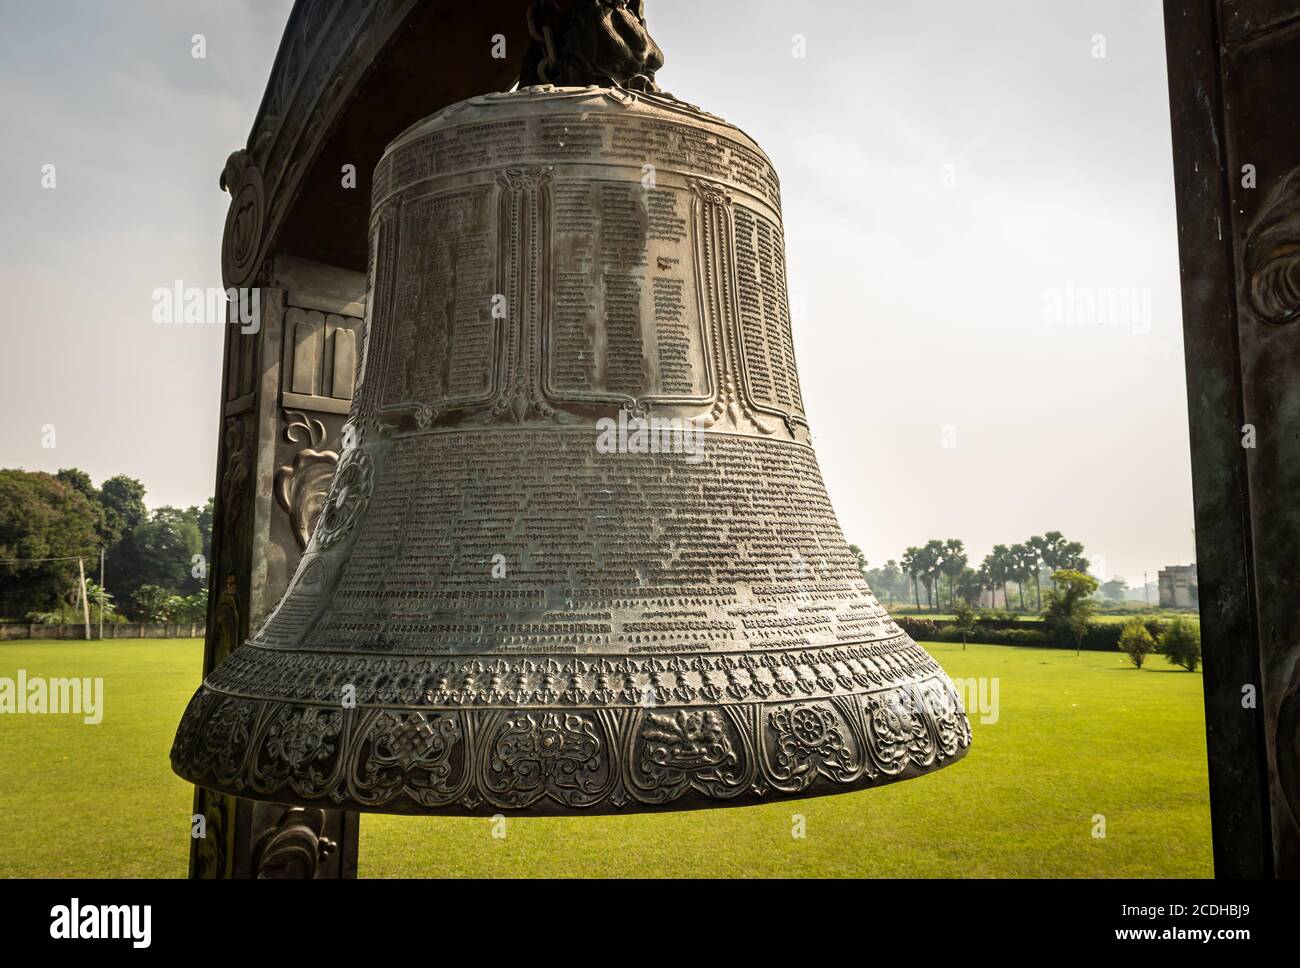 world peace bell from different unique angles close up shots image is taken at nalnda bihar india. the details view of huge world peace bell which is Stock Photo